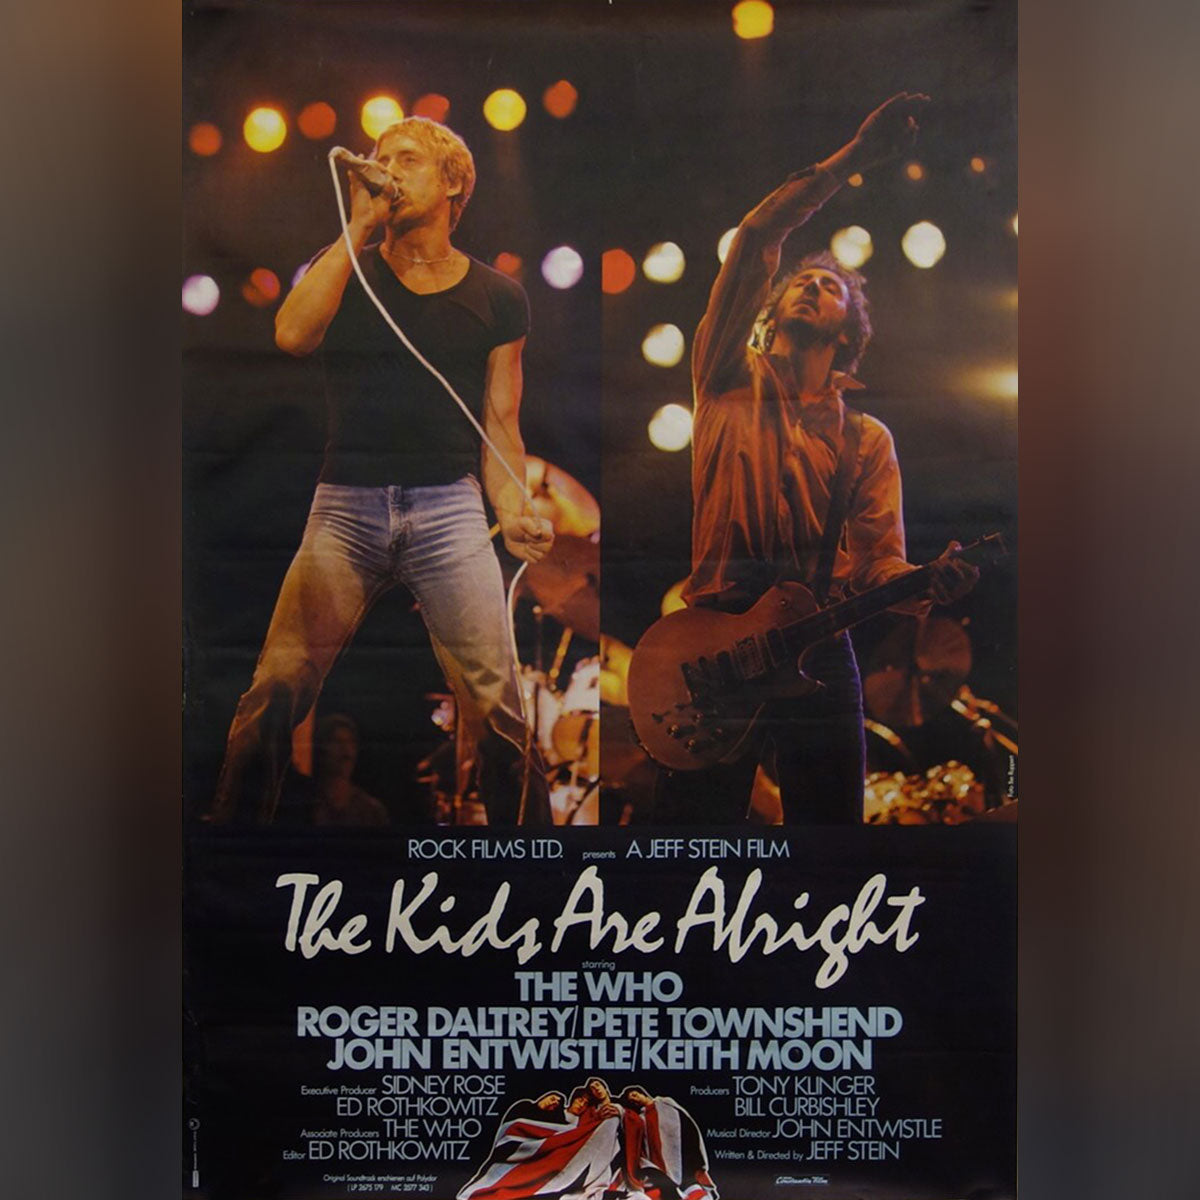 Kids Are Alright, The (1979)